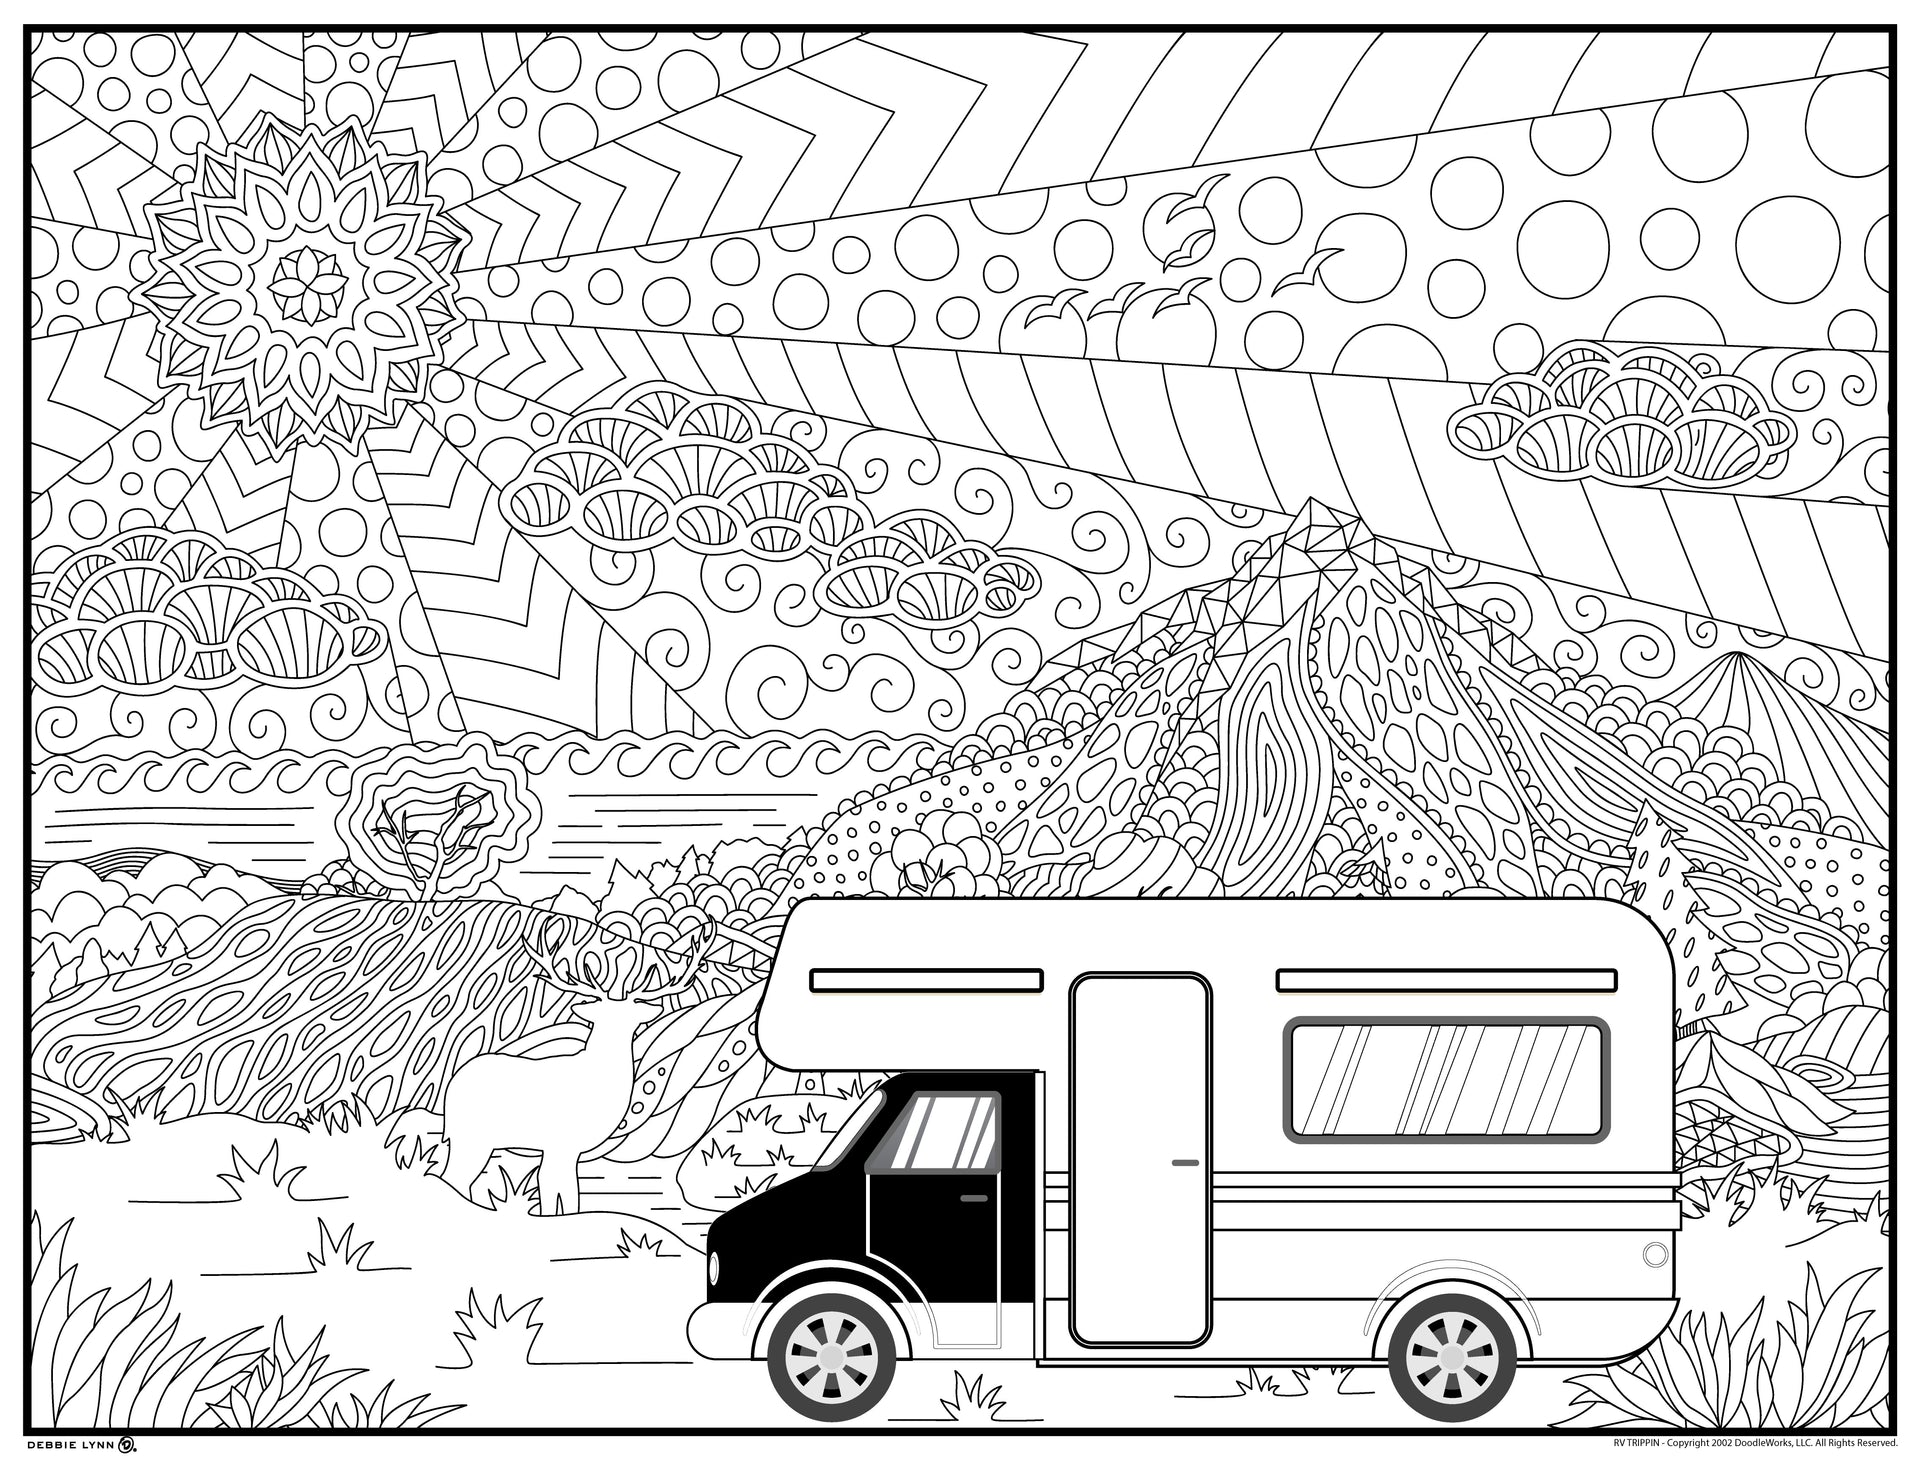 Rv trippin personalized giant coloring poster x â debbie lynn